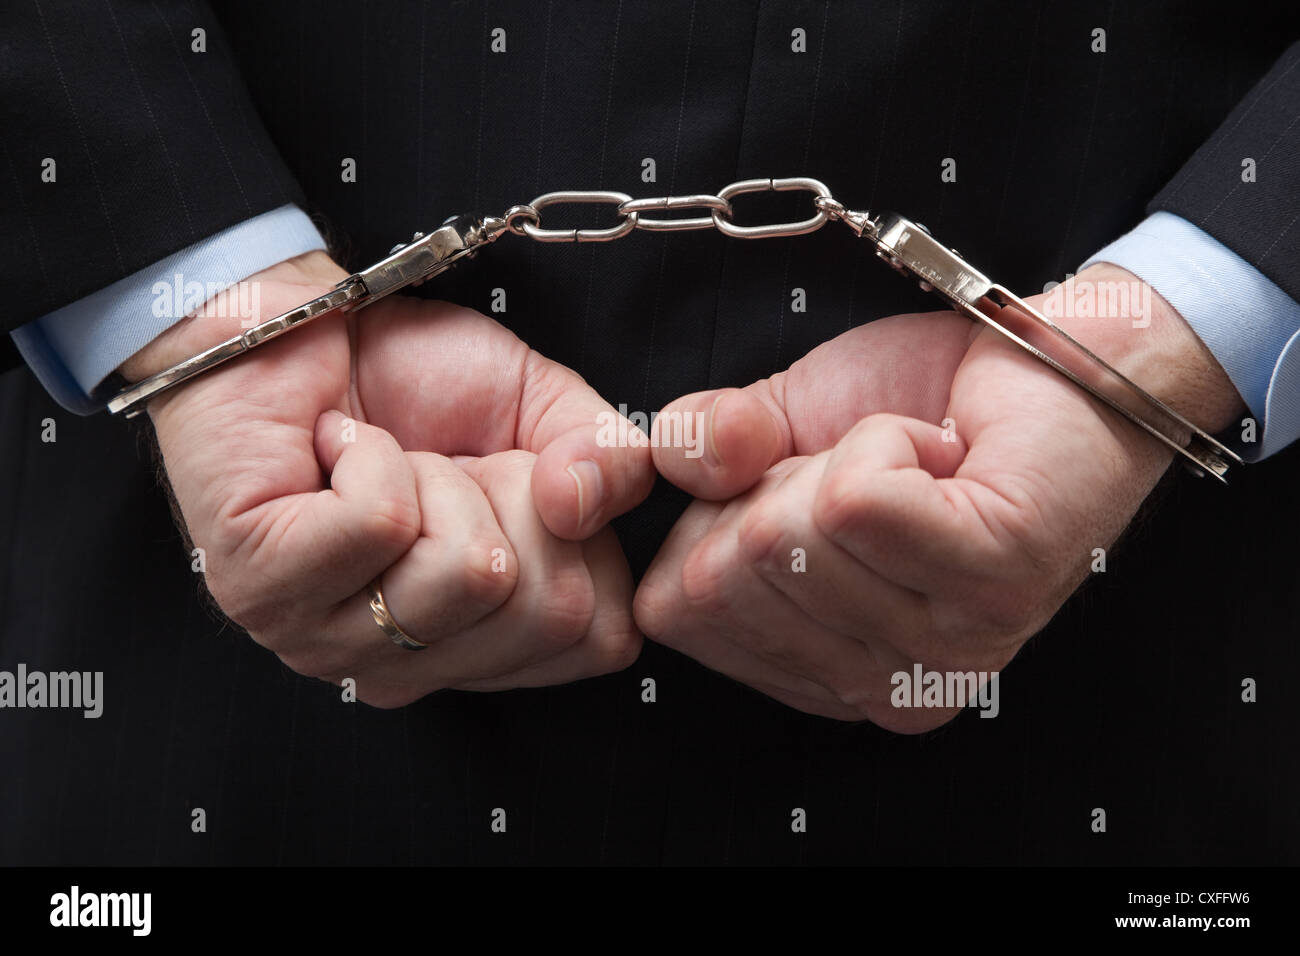 man in a suit and handcuffs Stock Photo